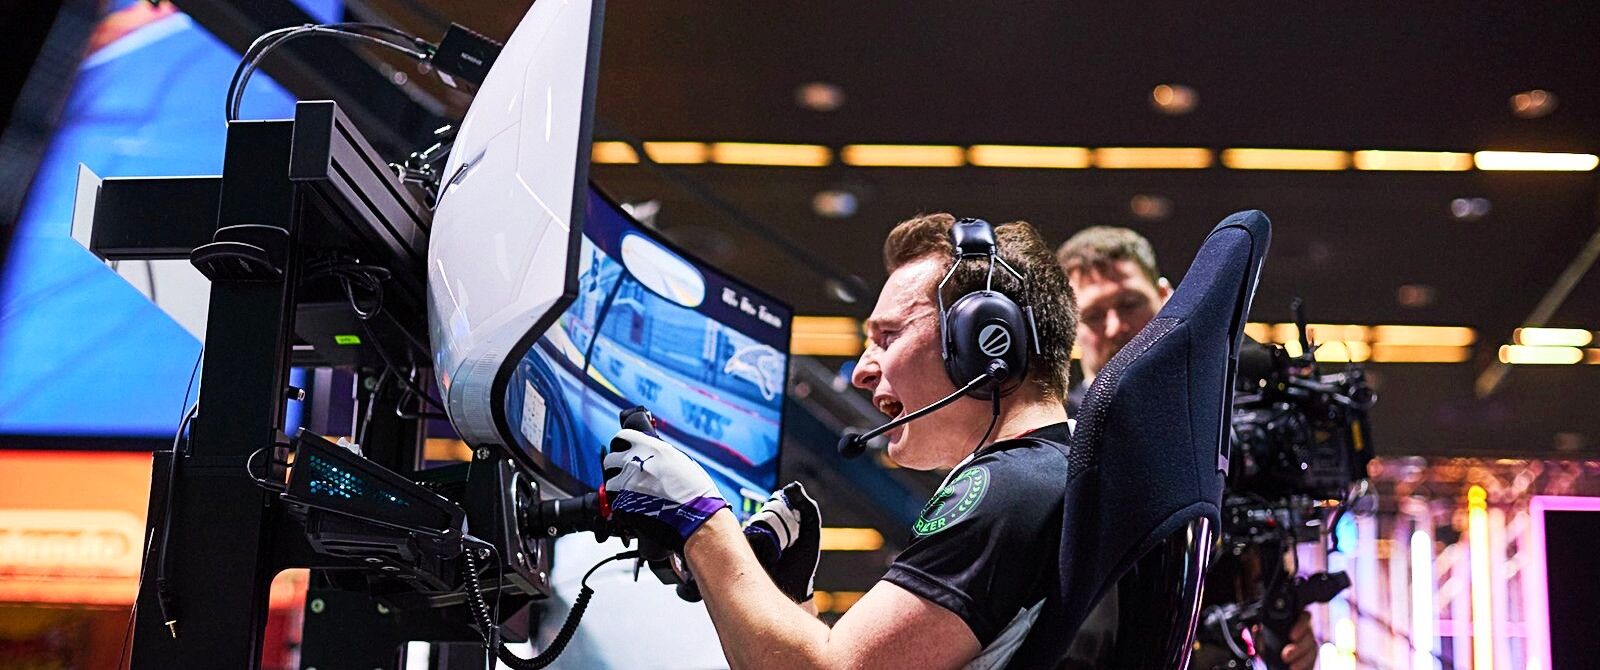 An image of Max Benecke celebrating in his sim rig at the ESL R1 event in Katowice.